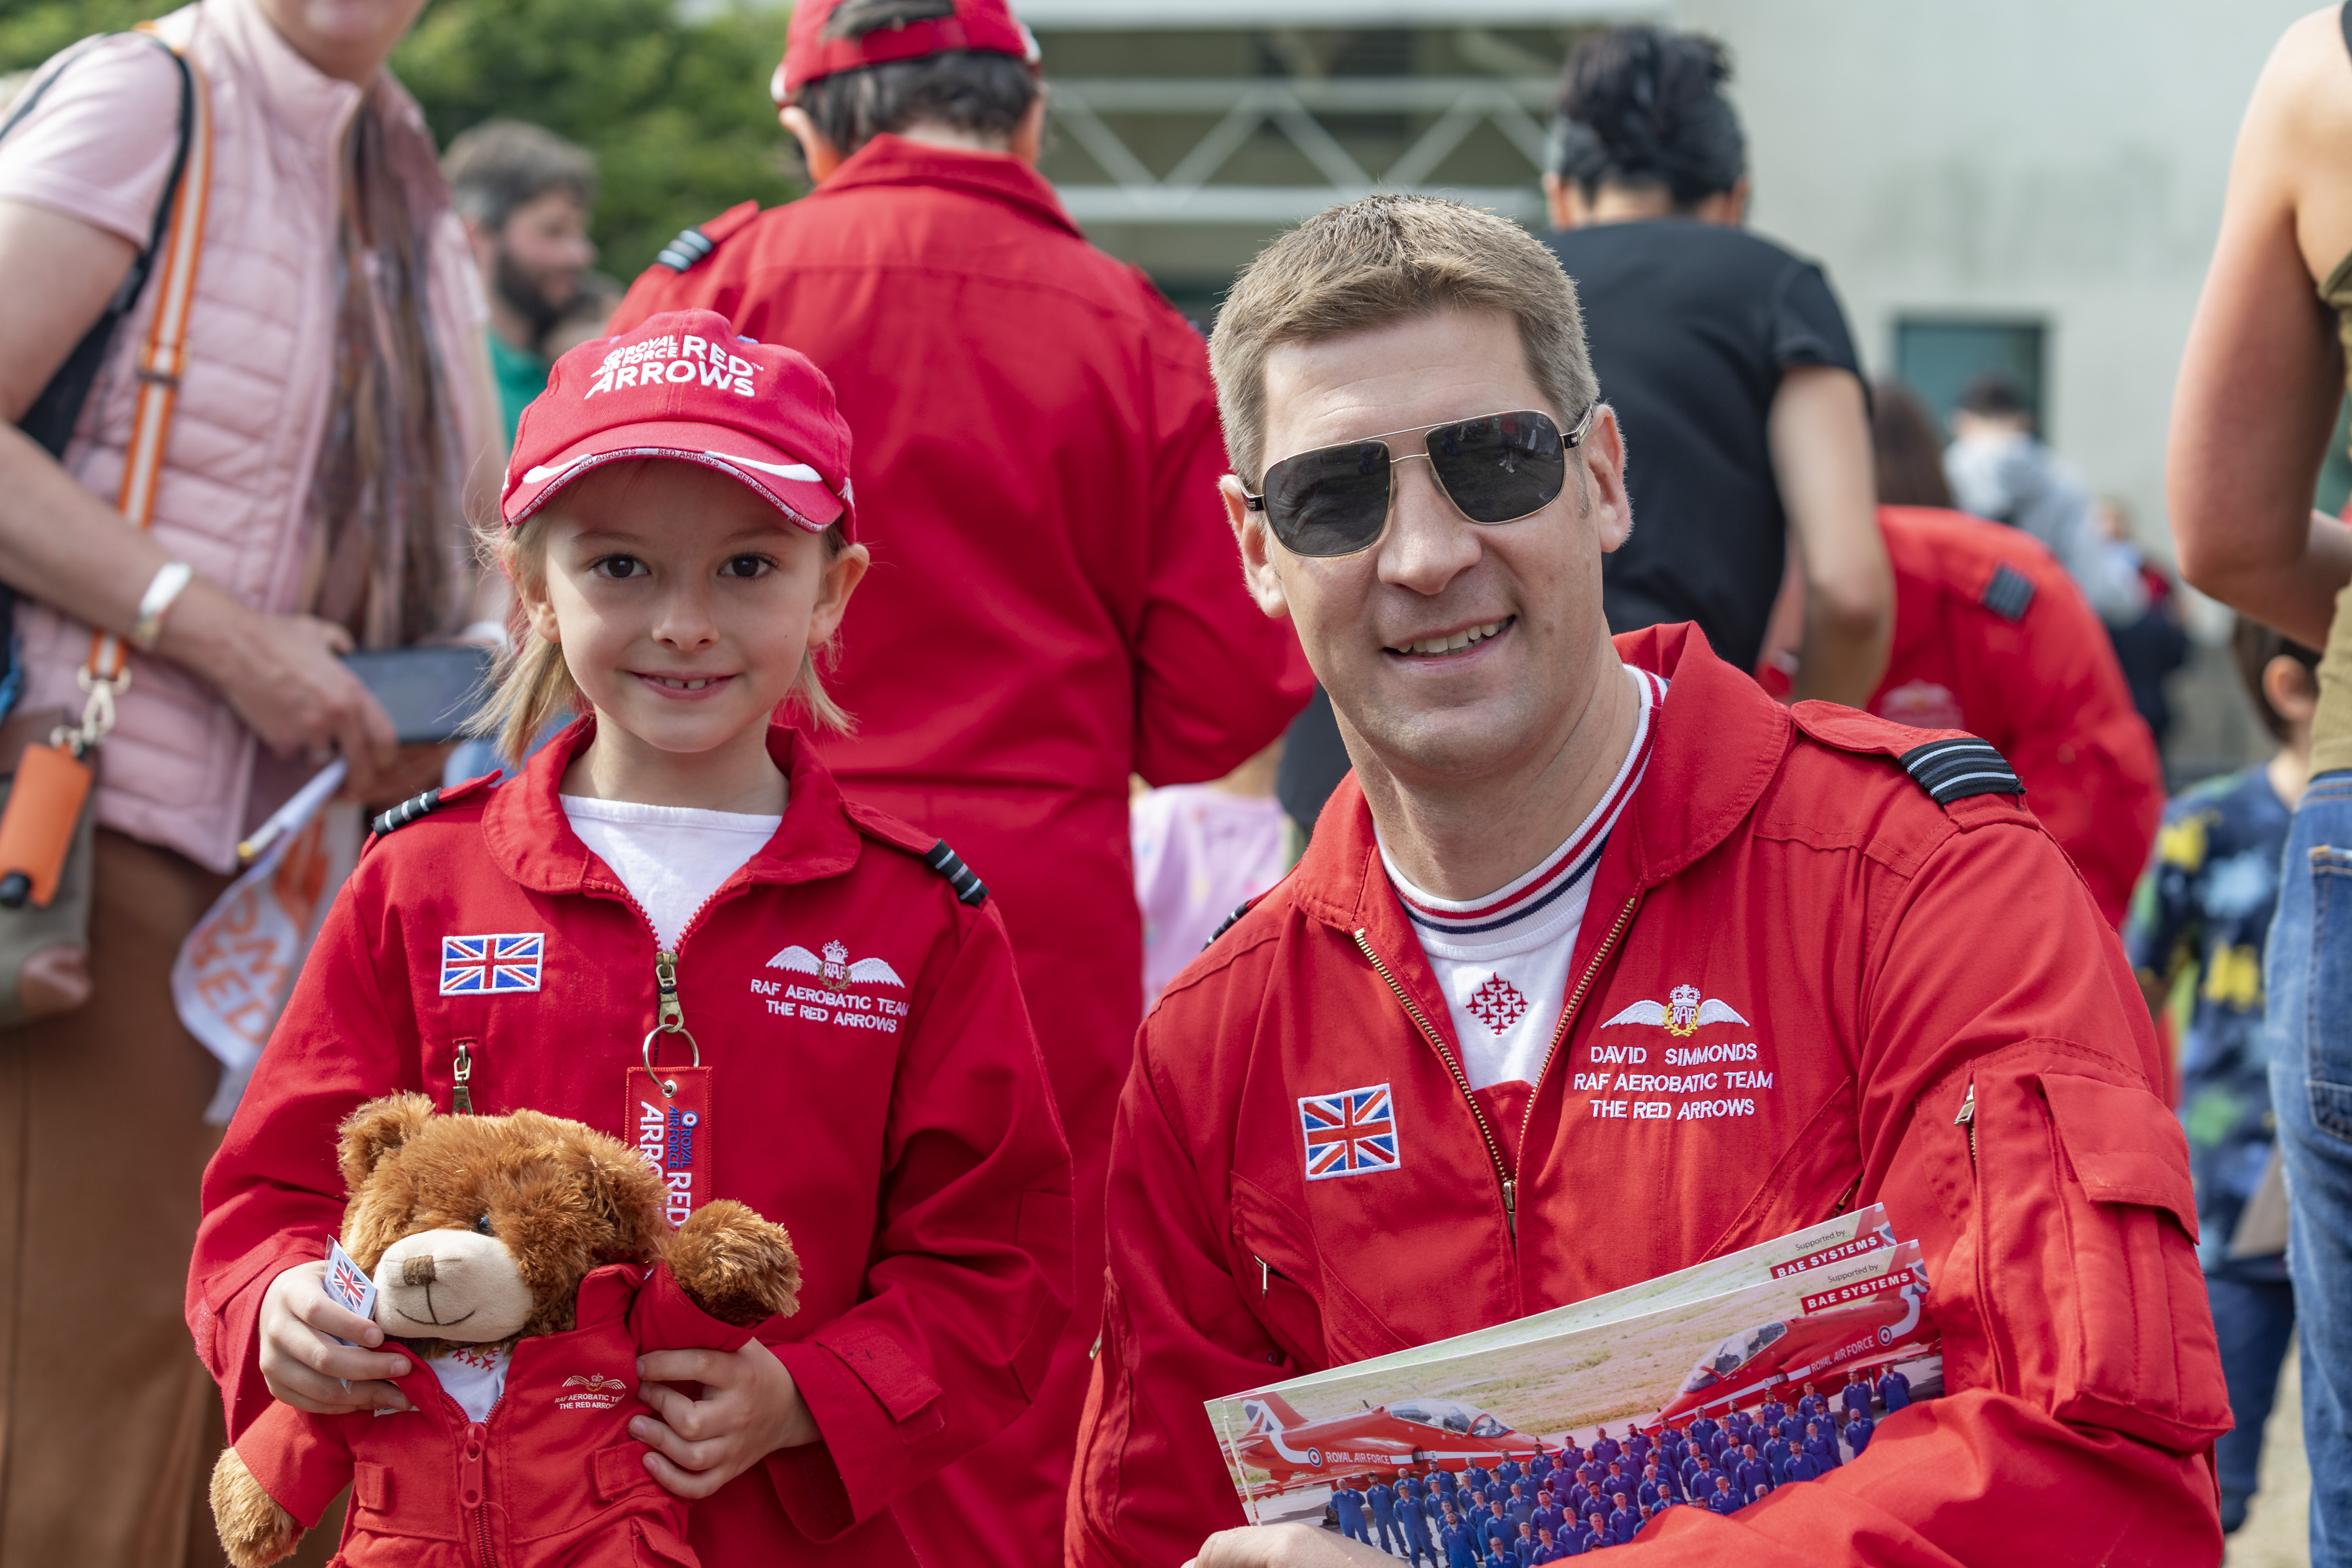 Meeting - and inspiring - people at events has been a humbling, important feature of the pilots' time with the Red Arrows.